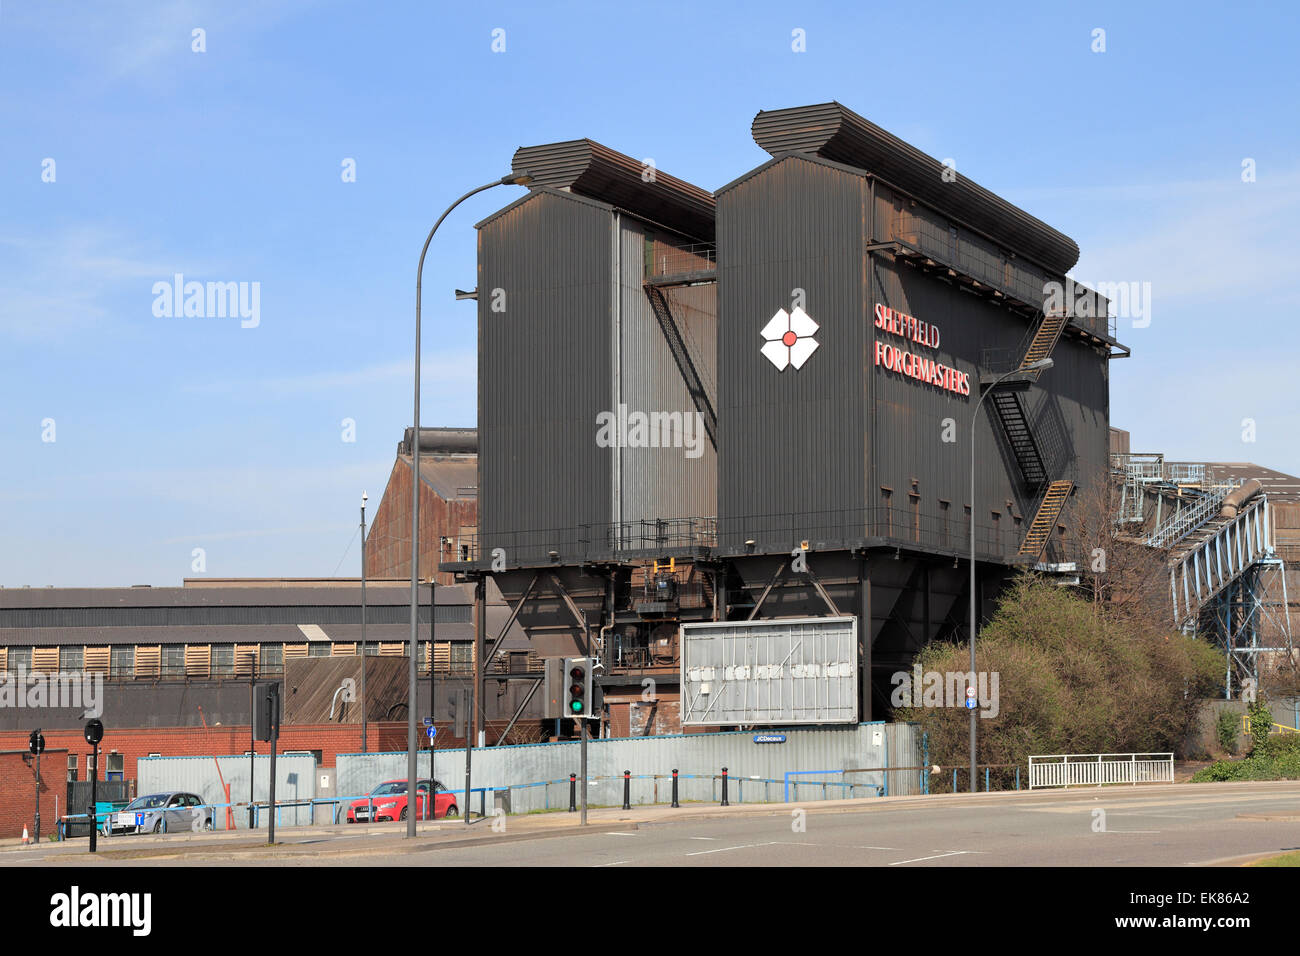 Sheffield Forgemasters steel works, Sheffield South Yorkshire, Inghilterra, Regno Unito. Foto Stock